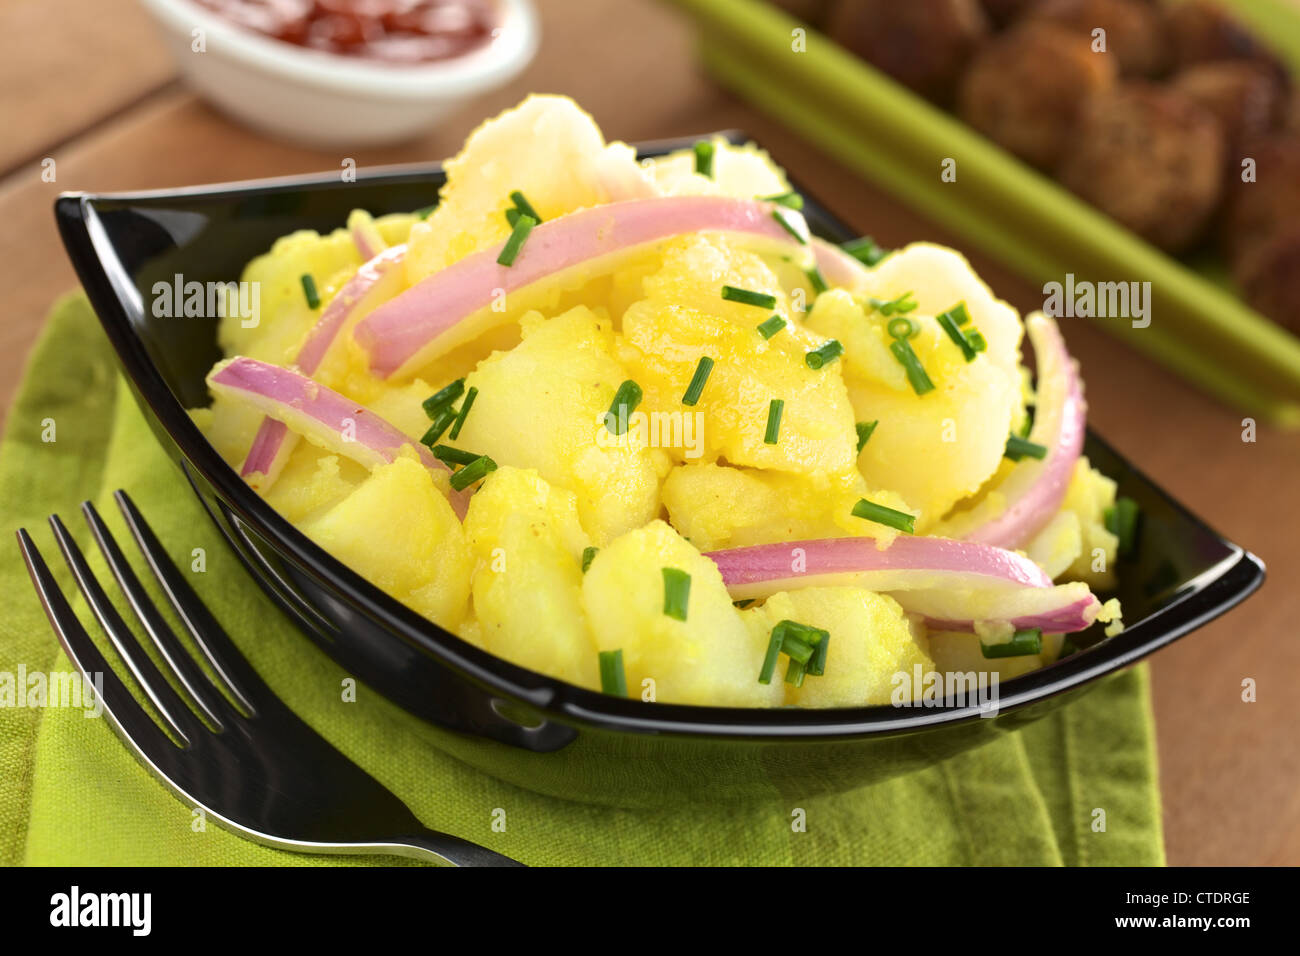 Potato salad with onions prepared in Swabian-Style (Southern Germany) with a vinegar-mustard sauce and garnished with chives Stock Photo